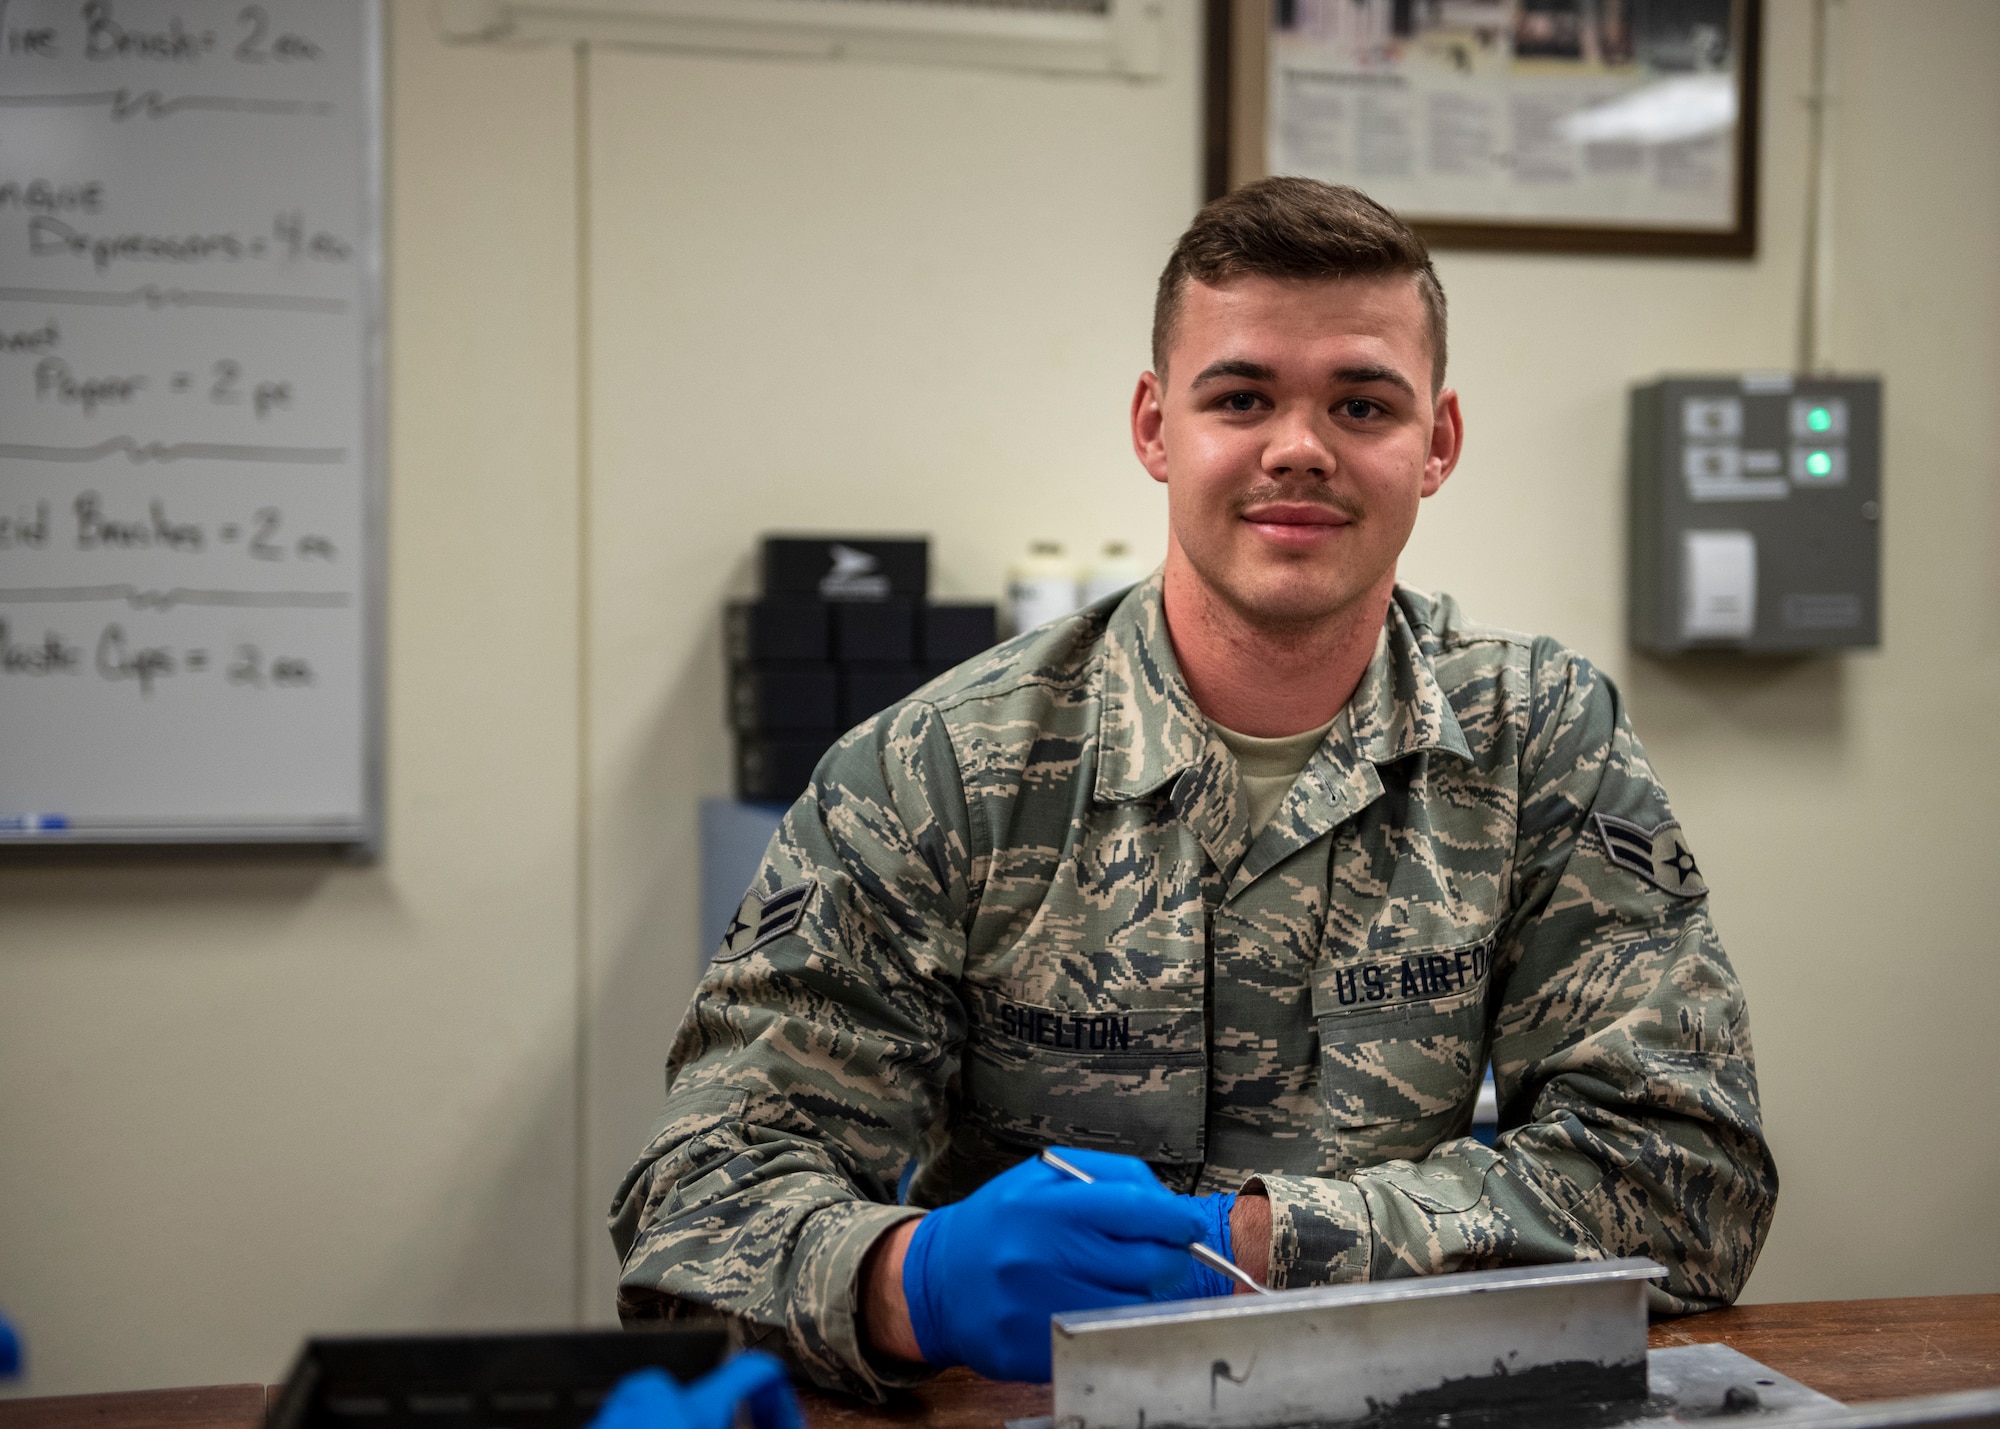 361st Fuels Airman receives ACE award